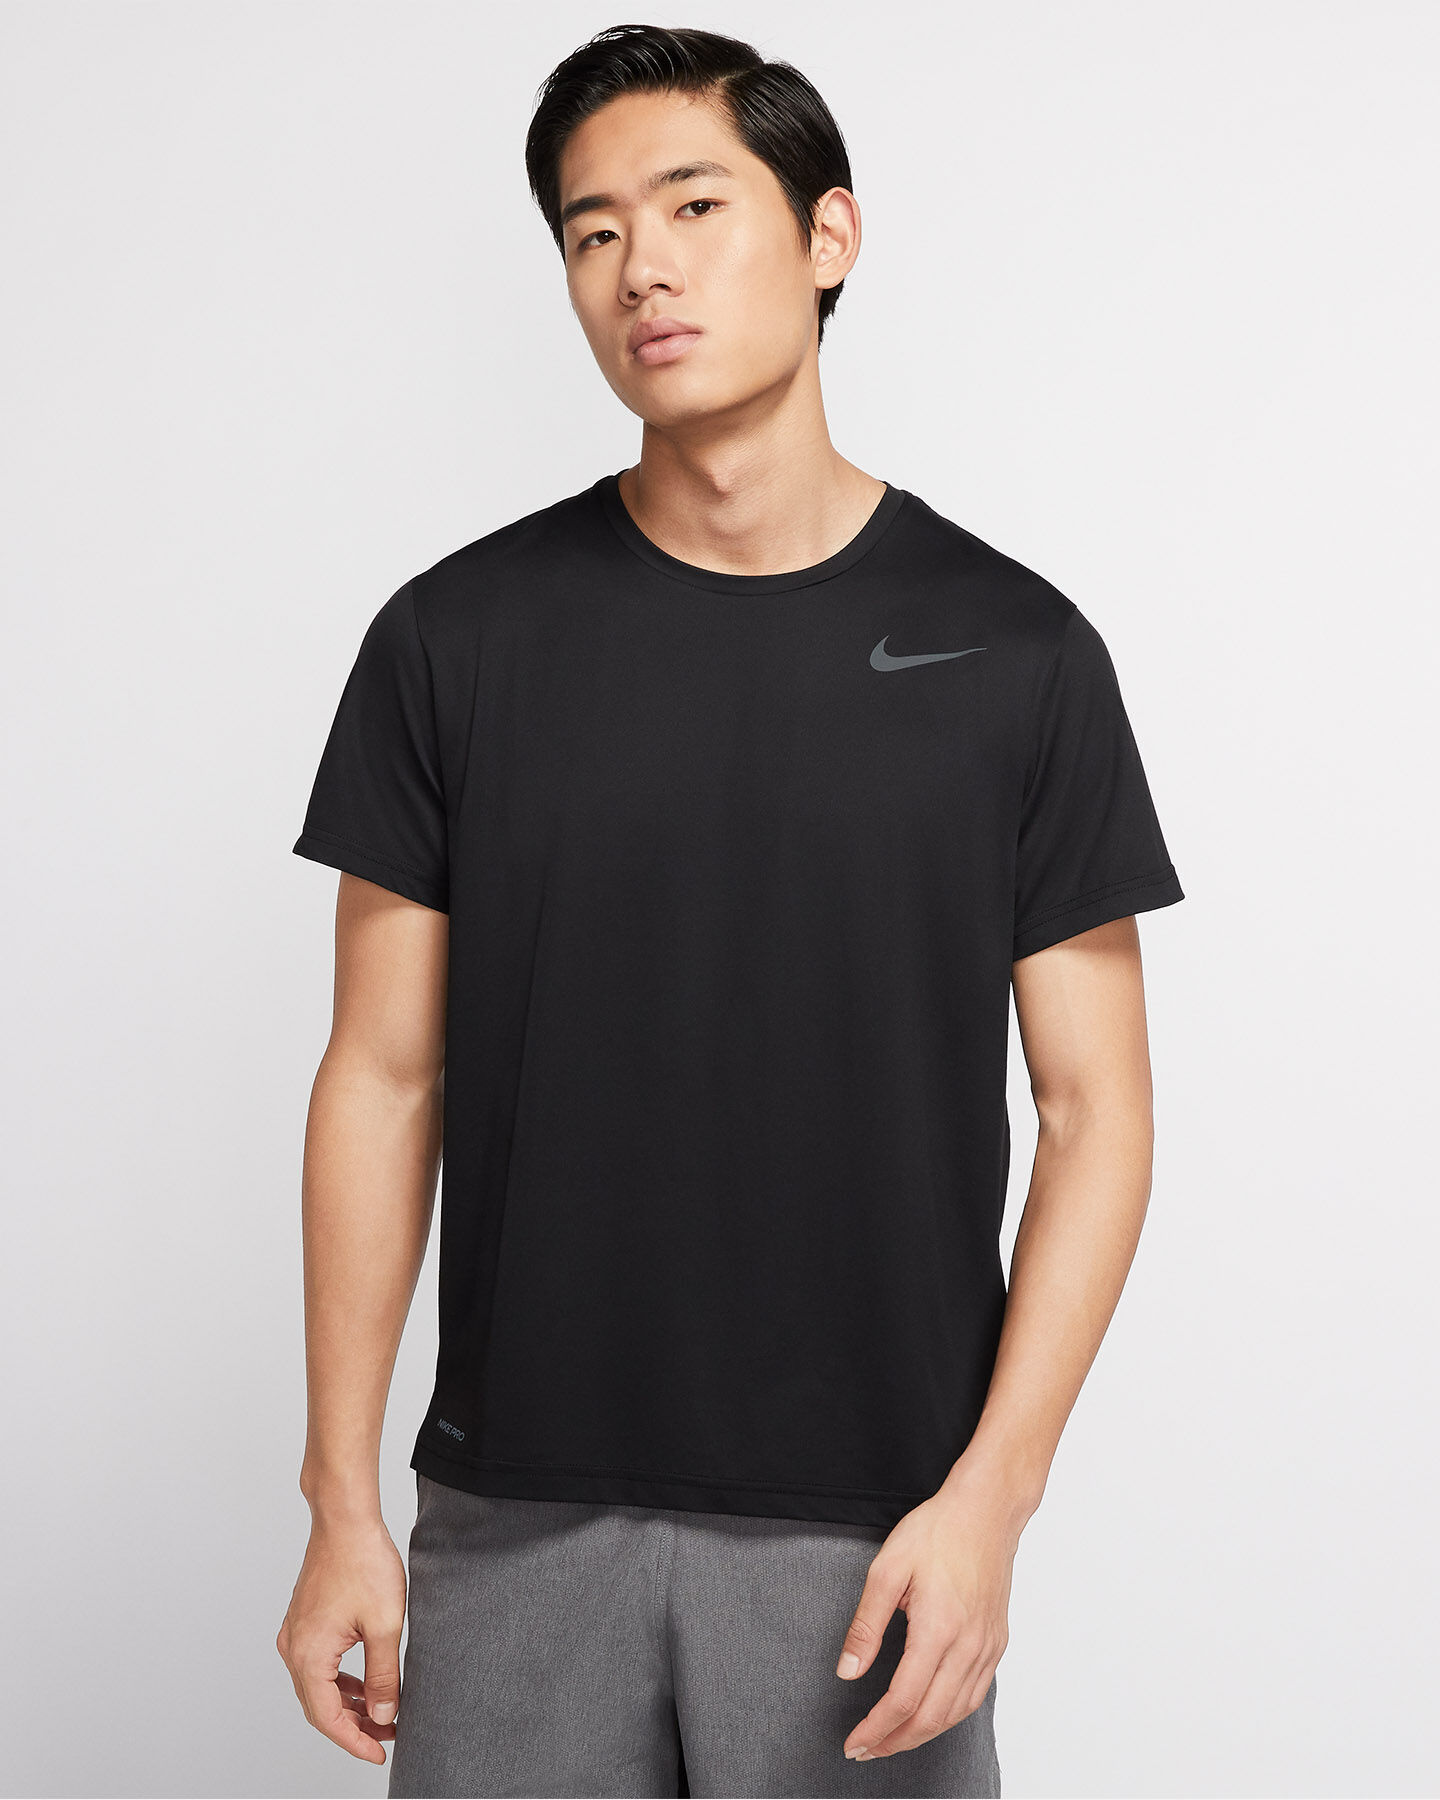  T-Shirt training NIKE PRO HYPER DRY M S5164272|010|S scatto 2